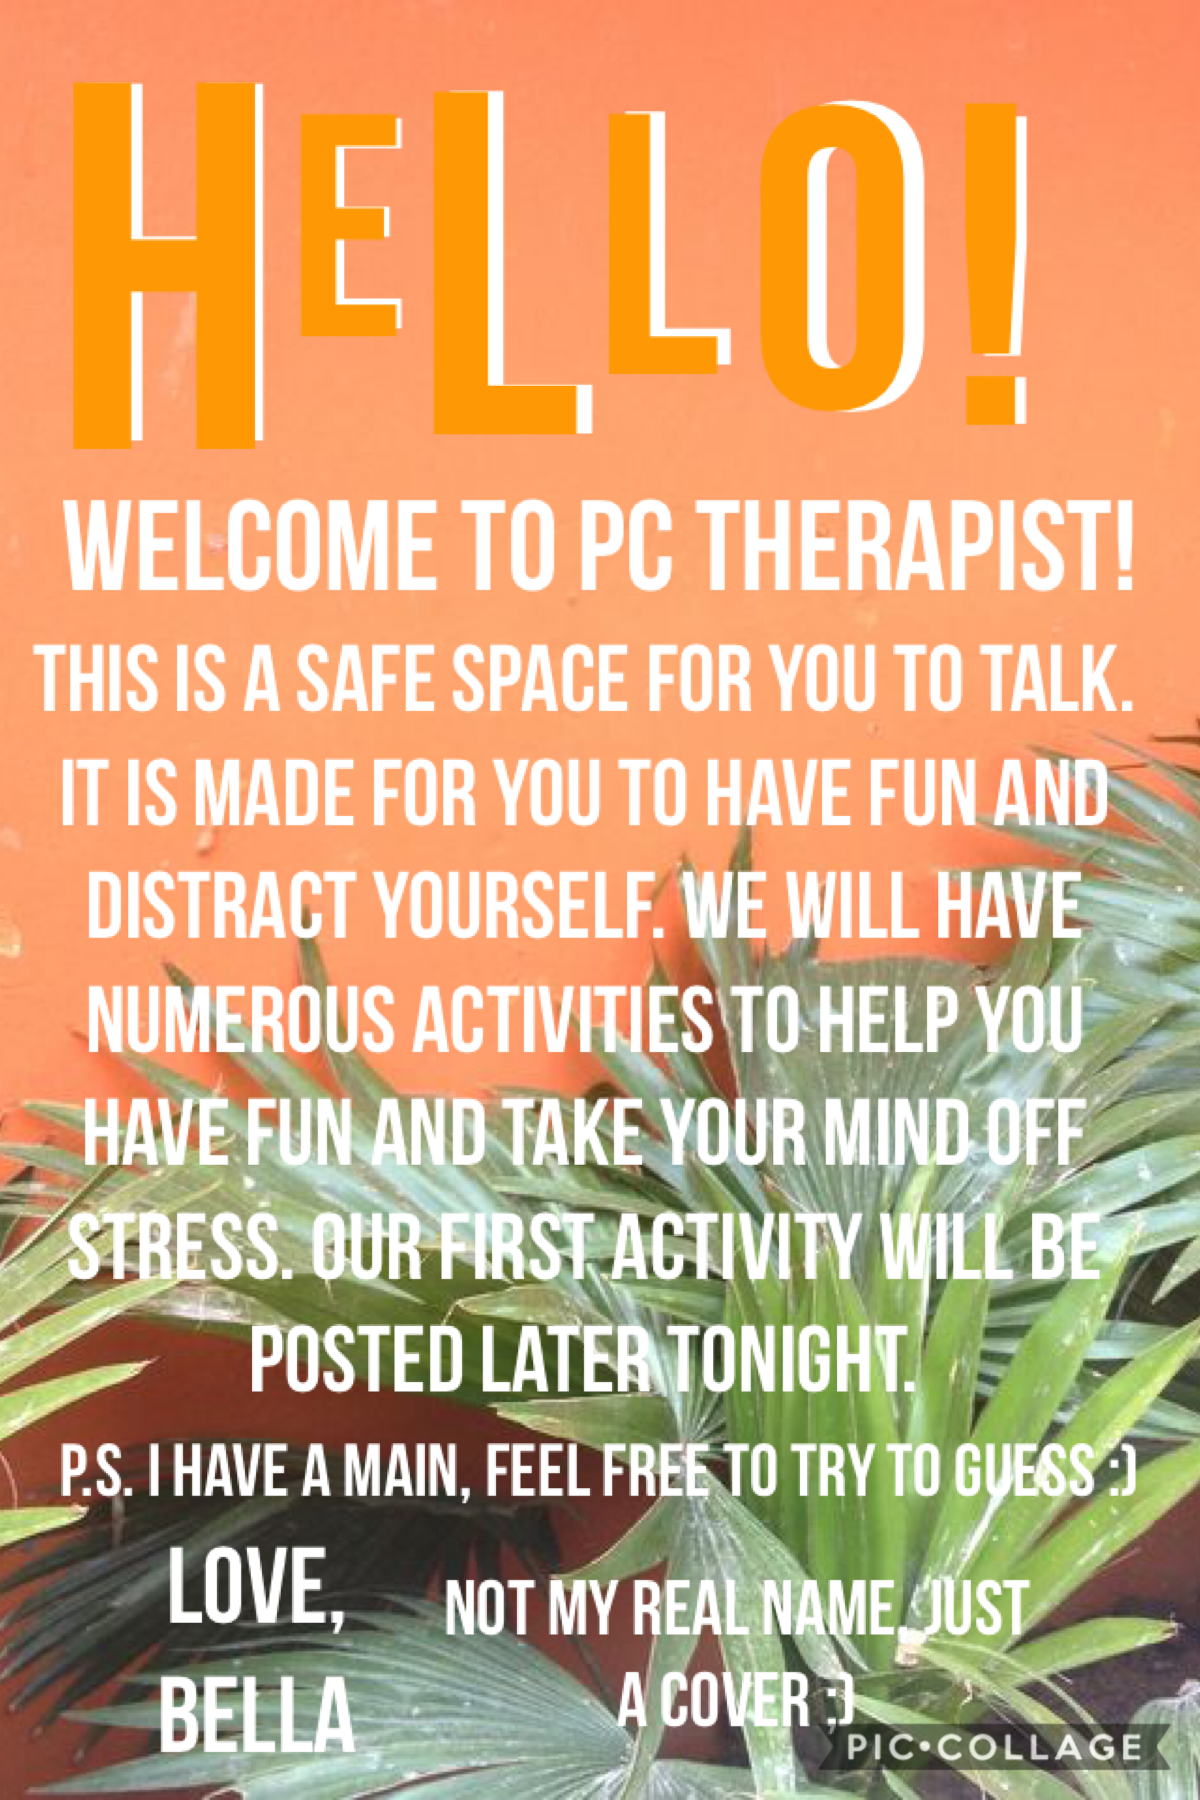 Welcome to PC Therapist! What activities are you interested in seeing? 